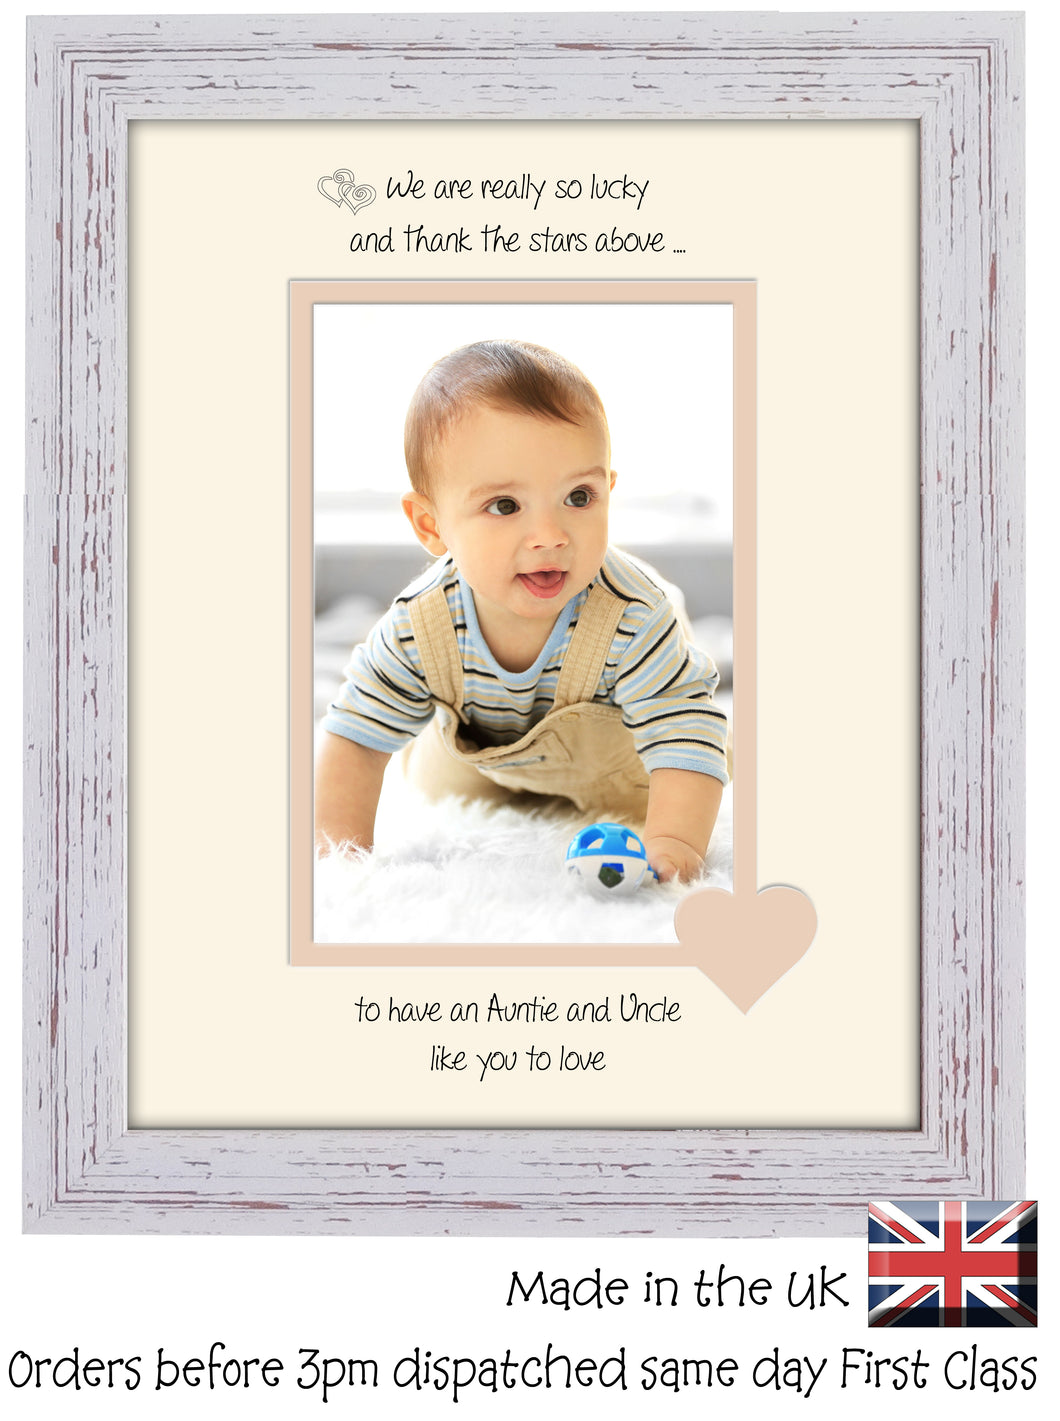 Auntie & Uncle Photo Frame - We Thank the stars Auntie & Uncle Portrait photo frame 6